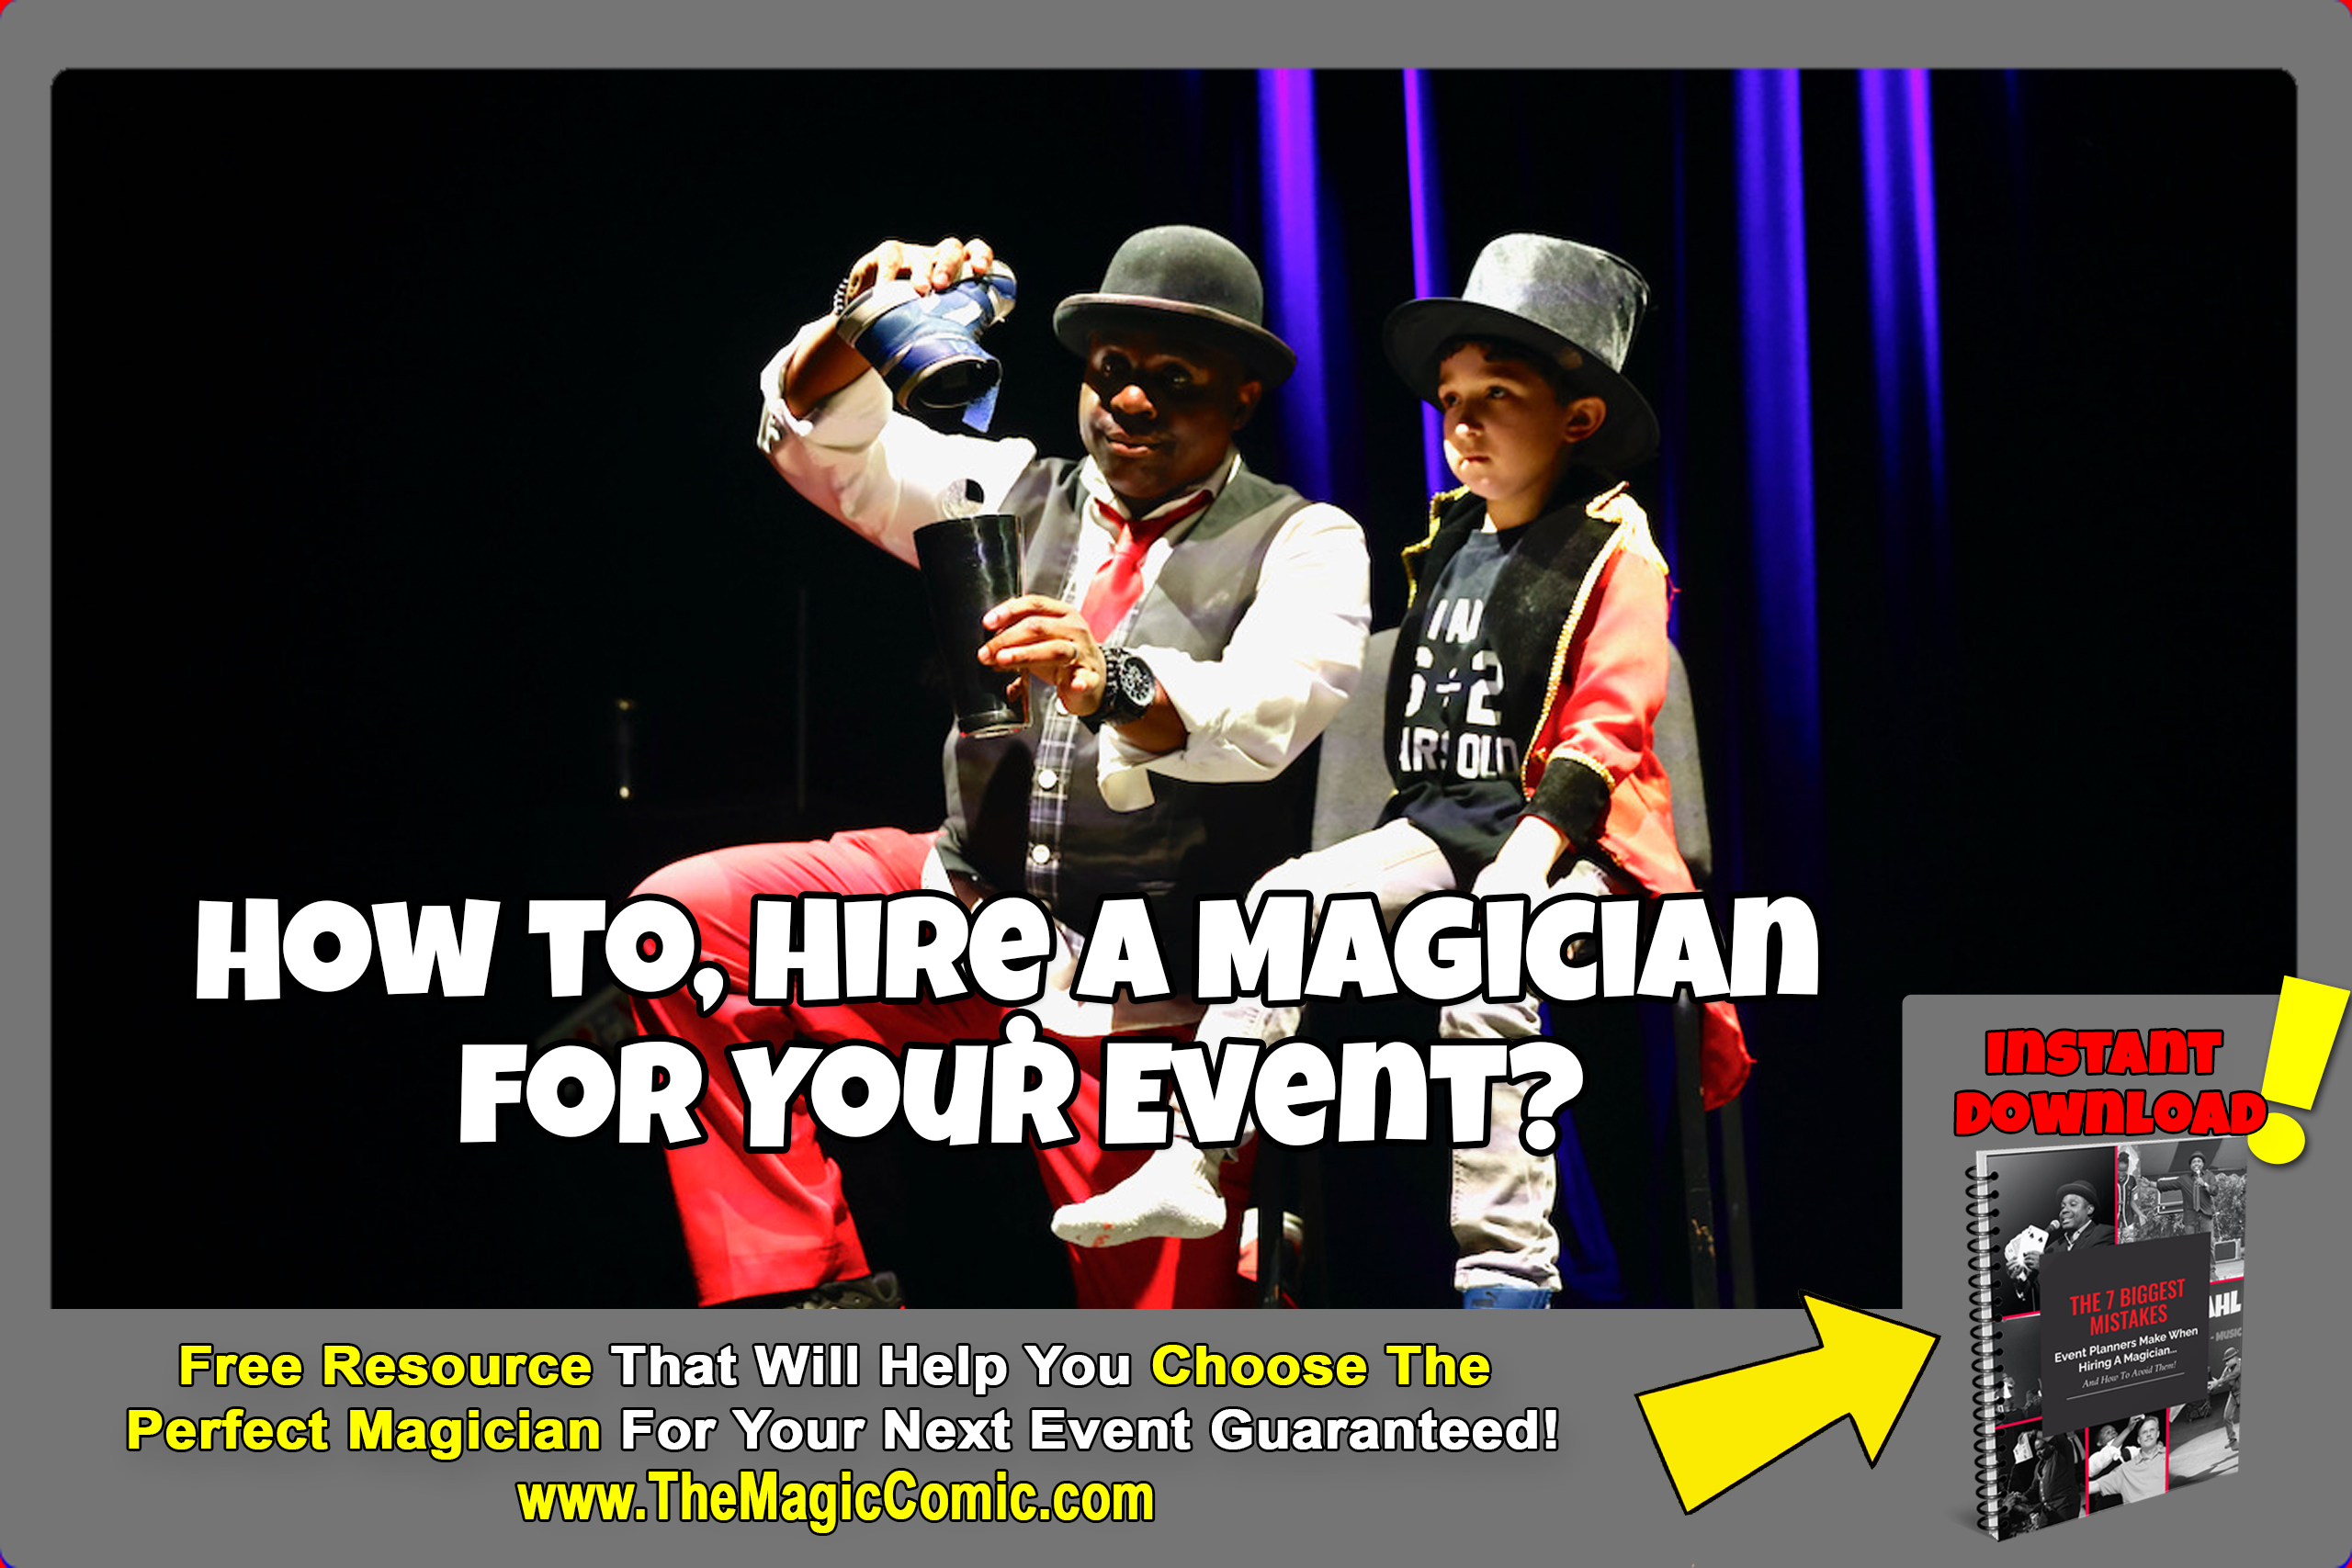 Read more about the article How to Hire a Magician for Your Event?